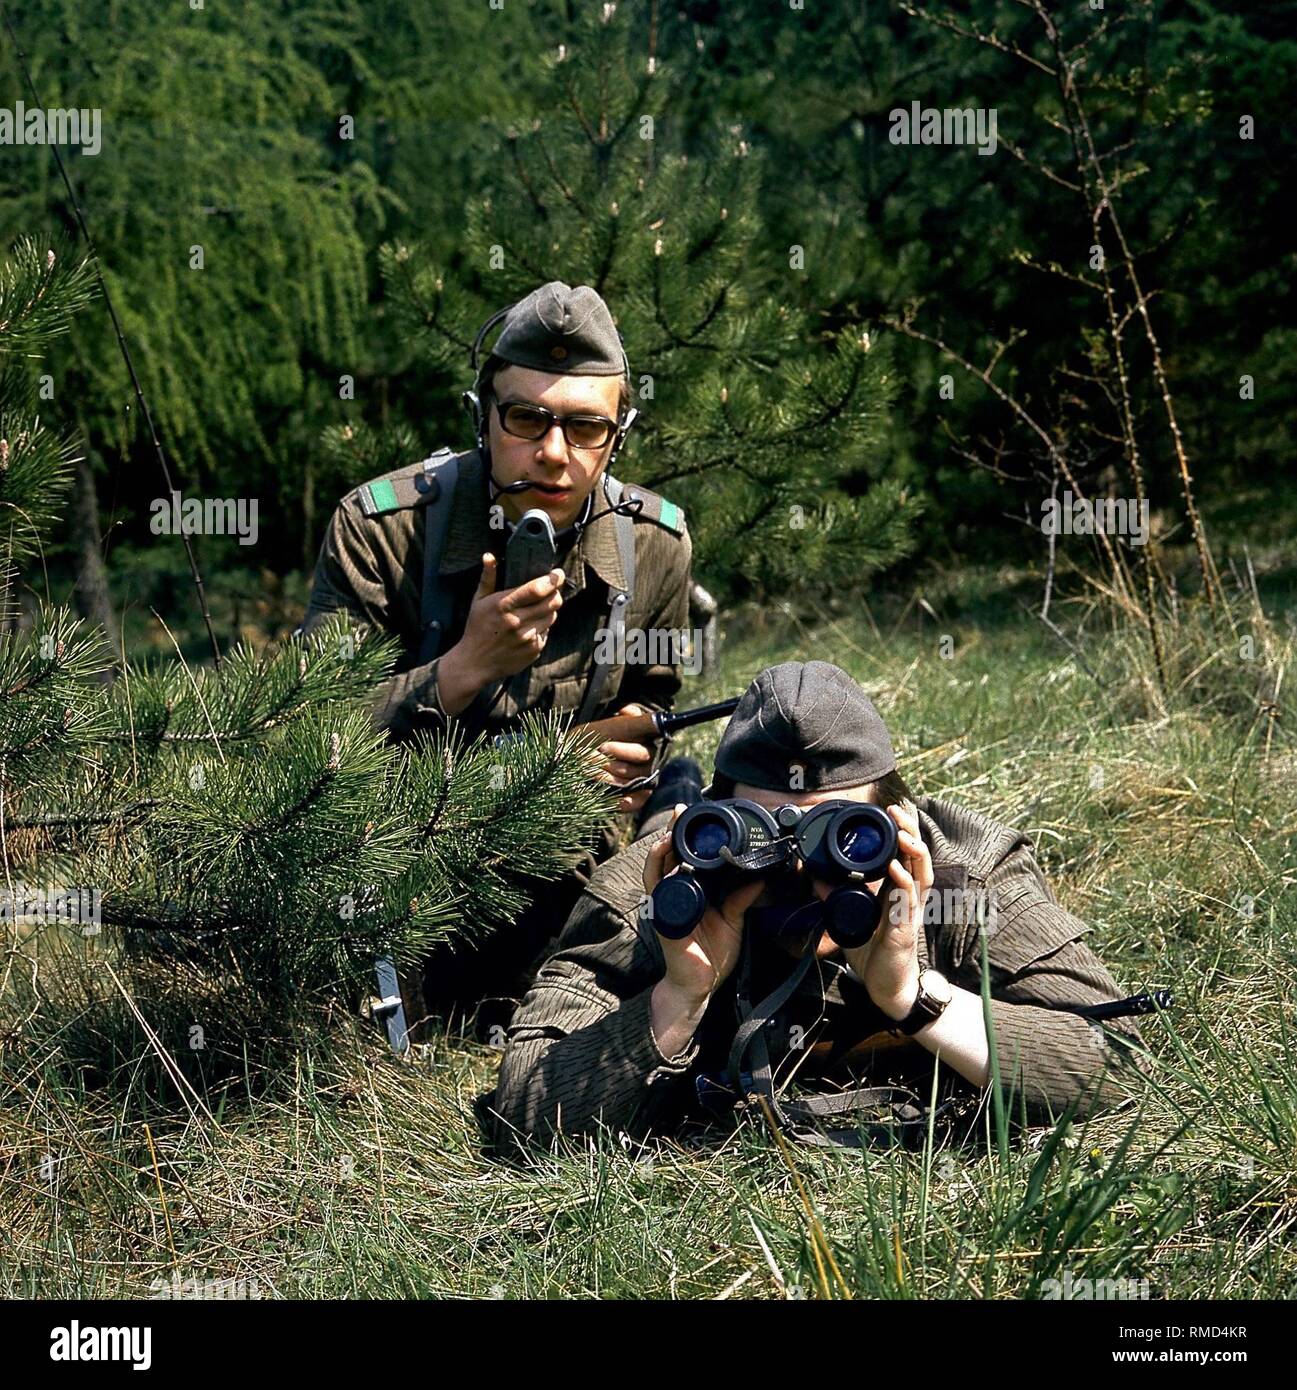 Soldiers of the GDR border troops at the inner German border in Eichsfeld. Stock Photo